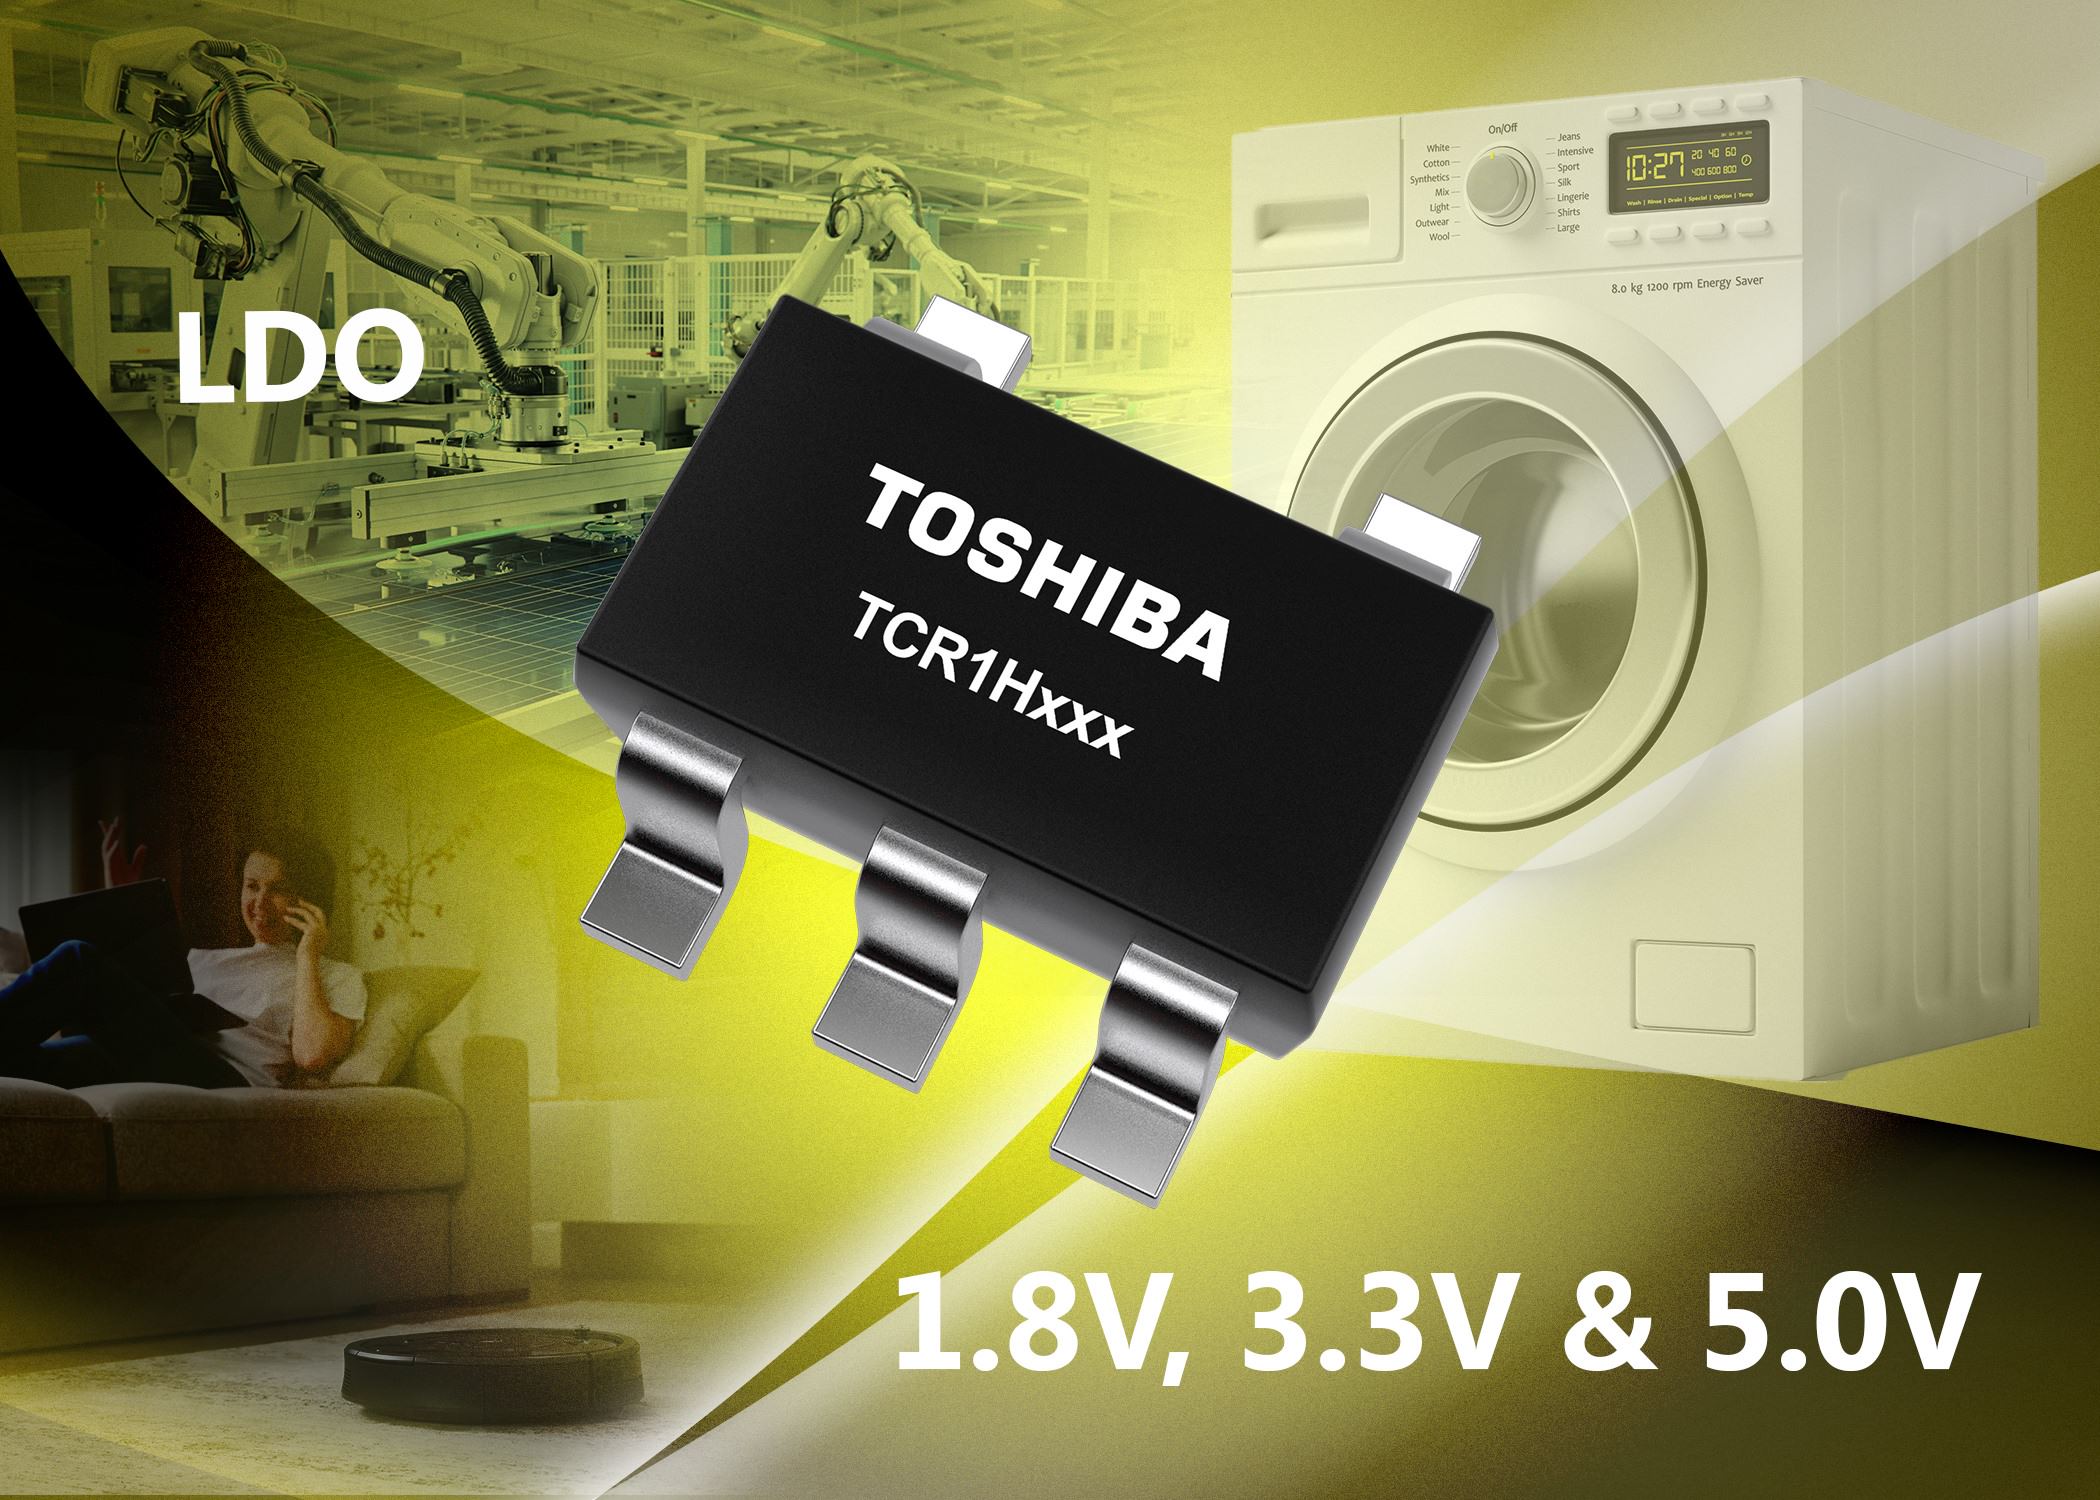 Toshiba Releases a New Range of Low-Current, High-Input Voltage LDO Regulators